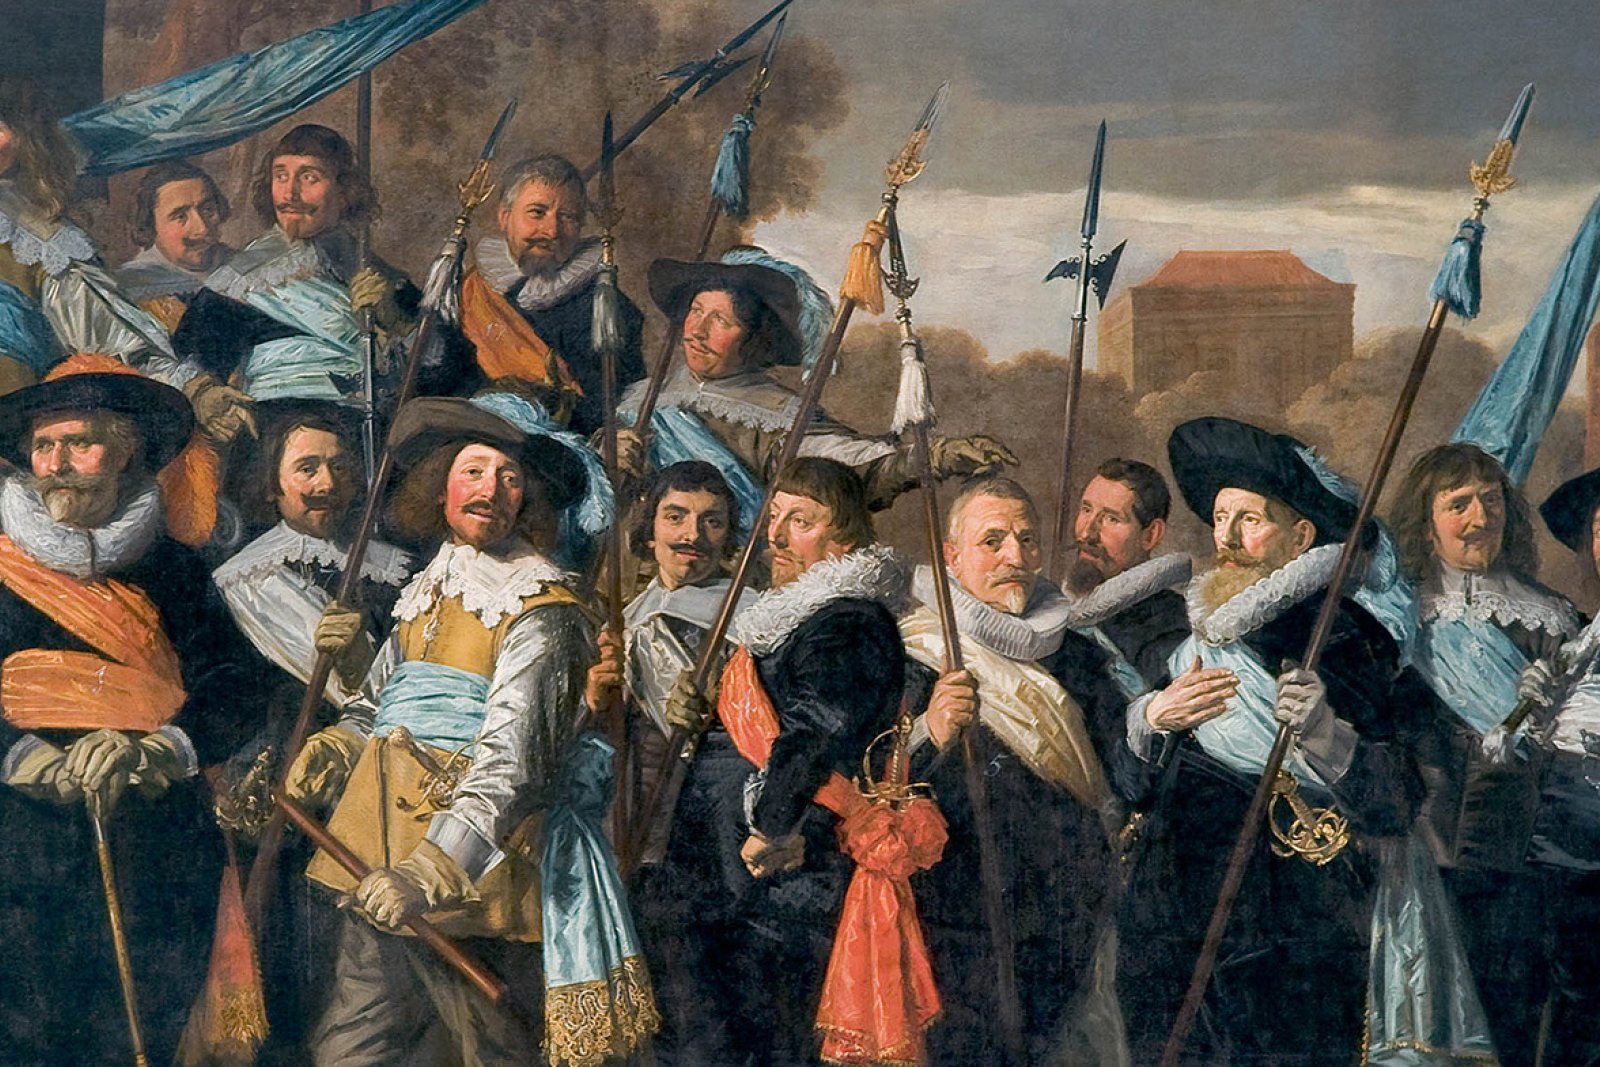 Officers and sub-alterns of the St George Civic Guard, Frans Hals Museum, Haarlem